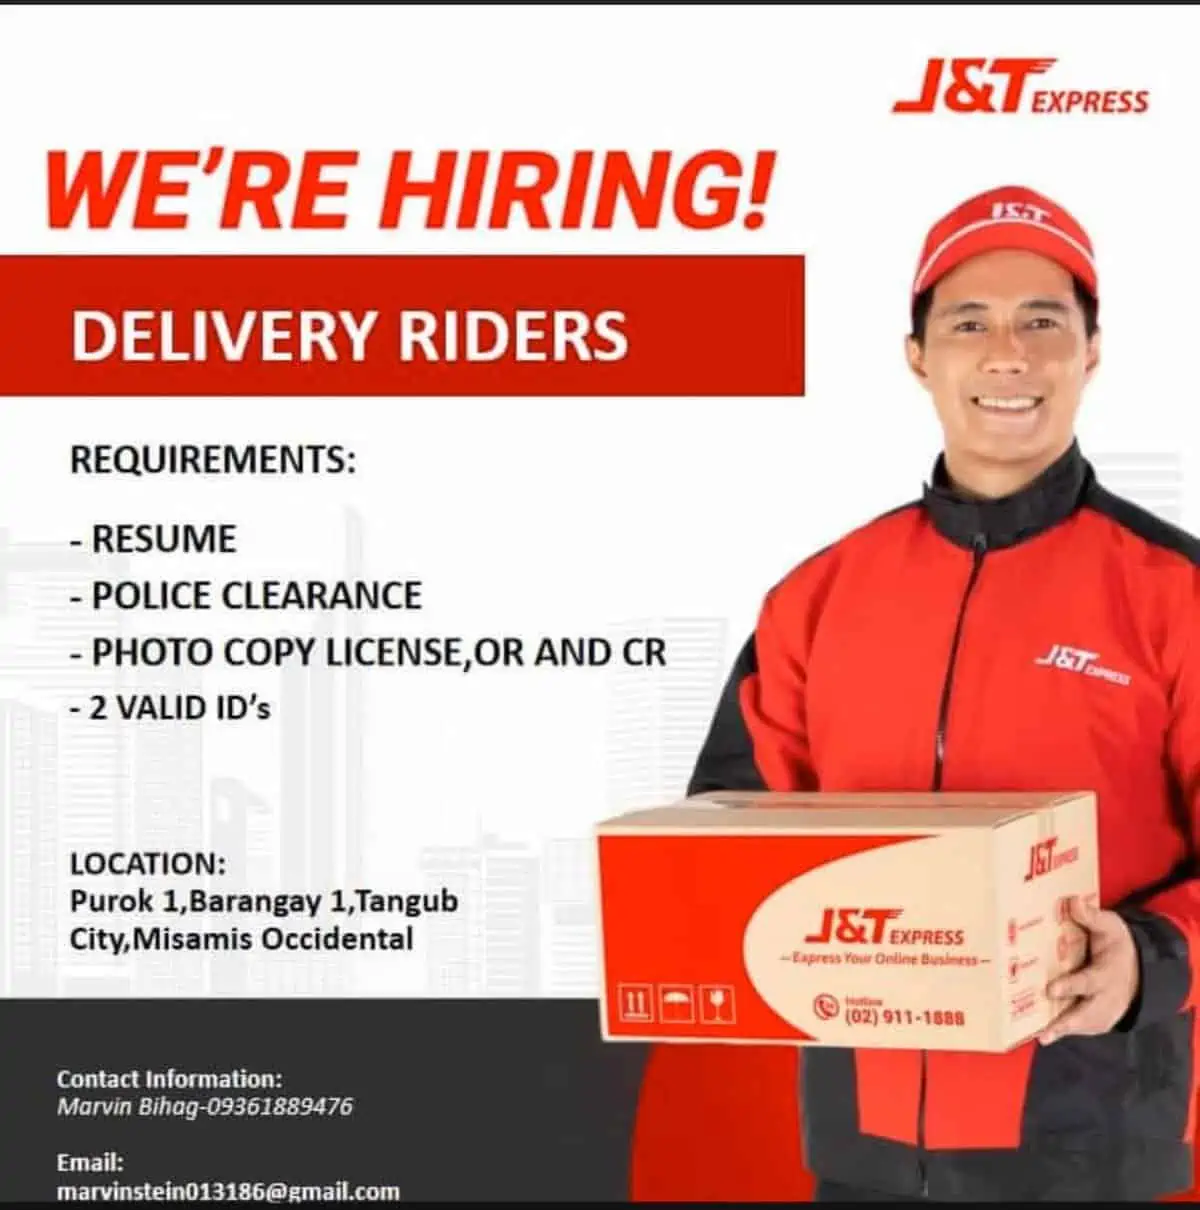 Delivery Riders Job Hiring